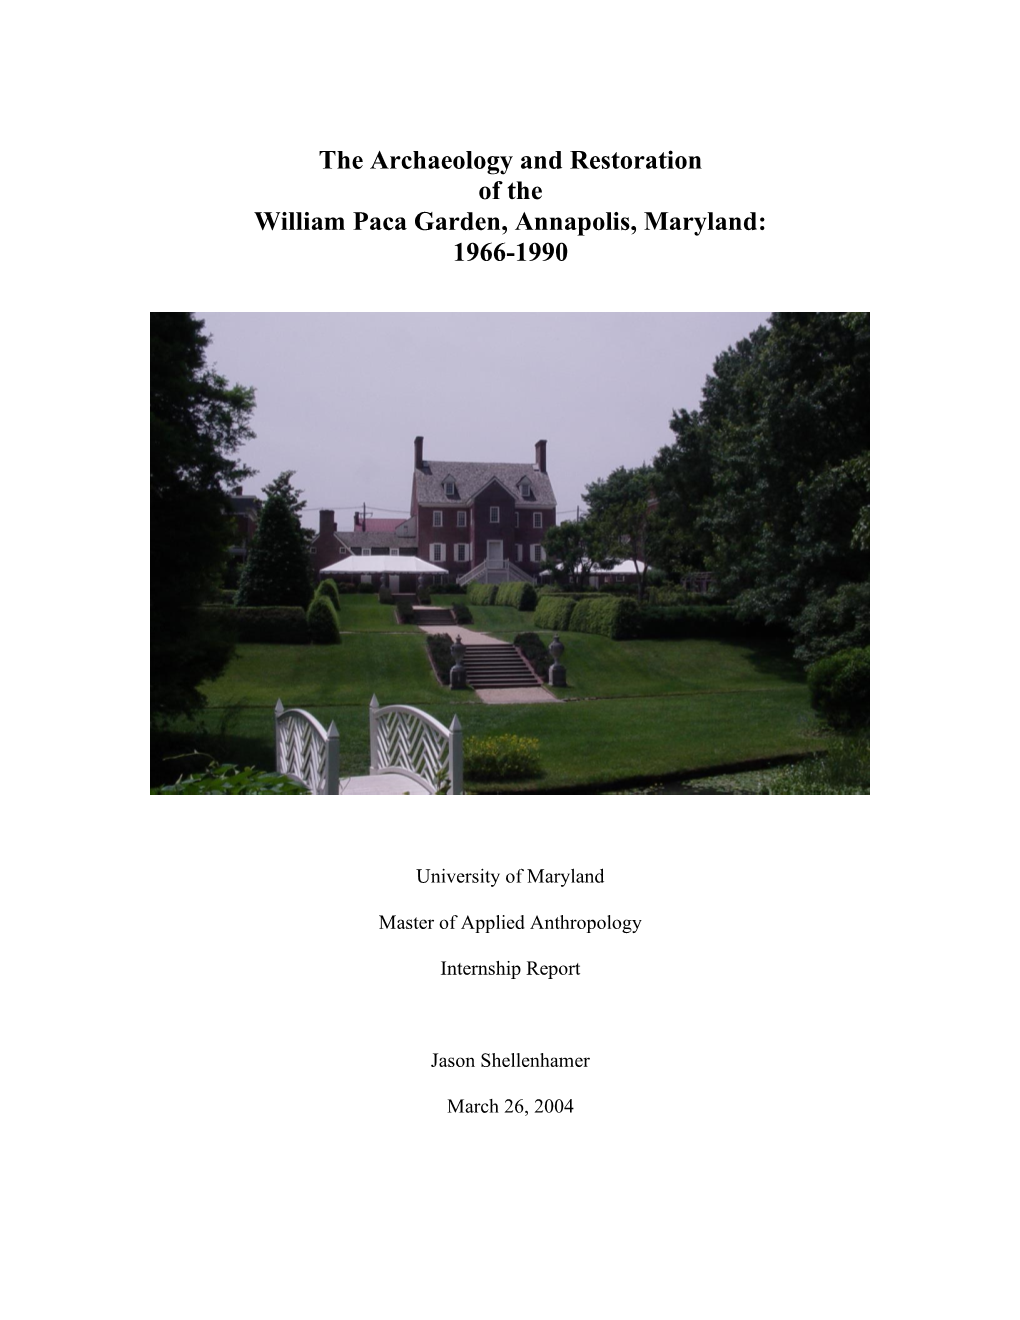 The Archaeology and Restoration of the William Paca Garden, Annapolis, Maryland: 1966-1990